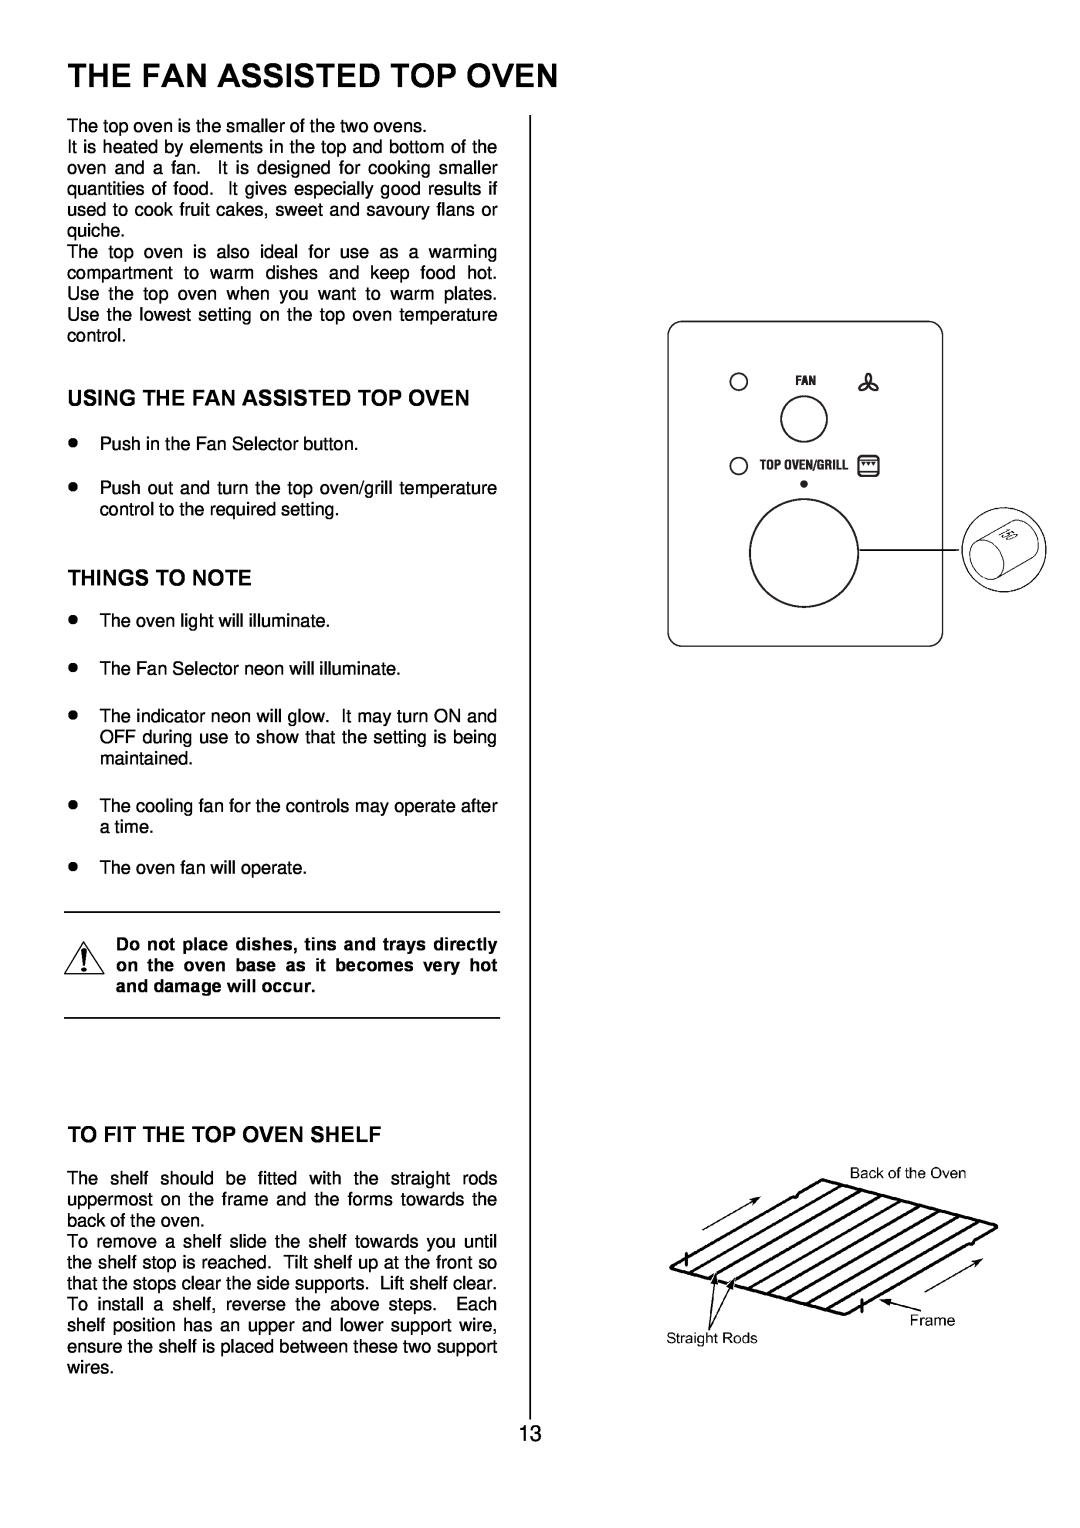 Zanussi ZUQ 875 manual Using The Fan Assisted Top Oven, To Fit The Top Oven Shelf, Things To Note 